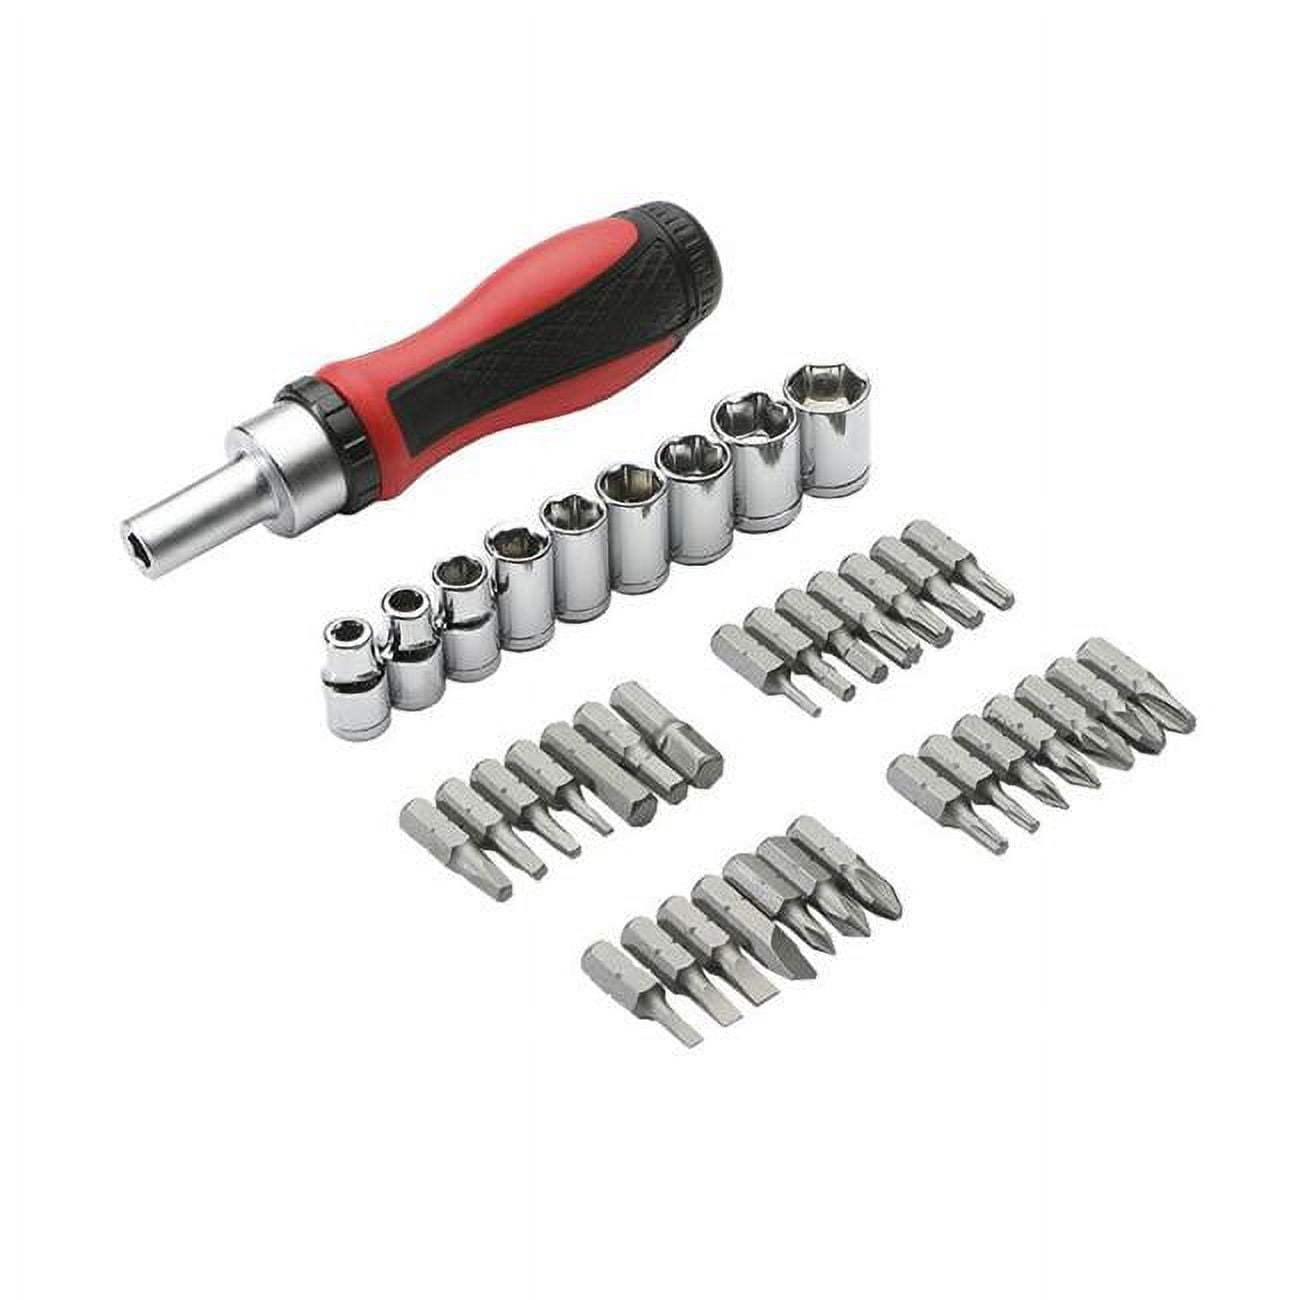 Picture of Allied 45580 Screwdriver Set - 38 Piece